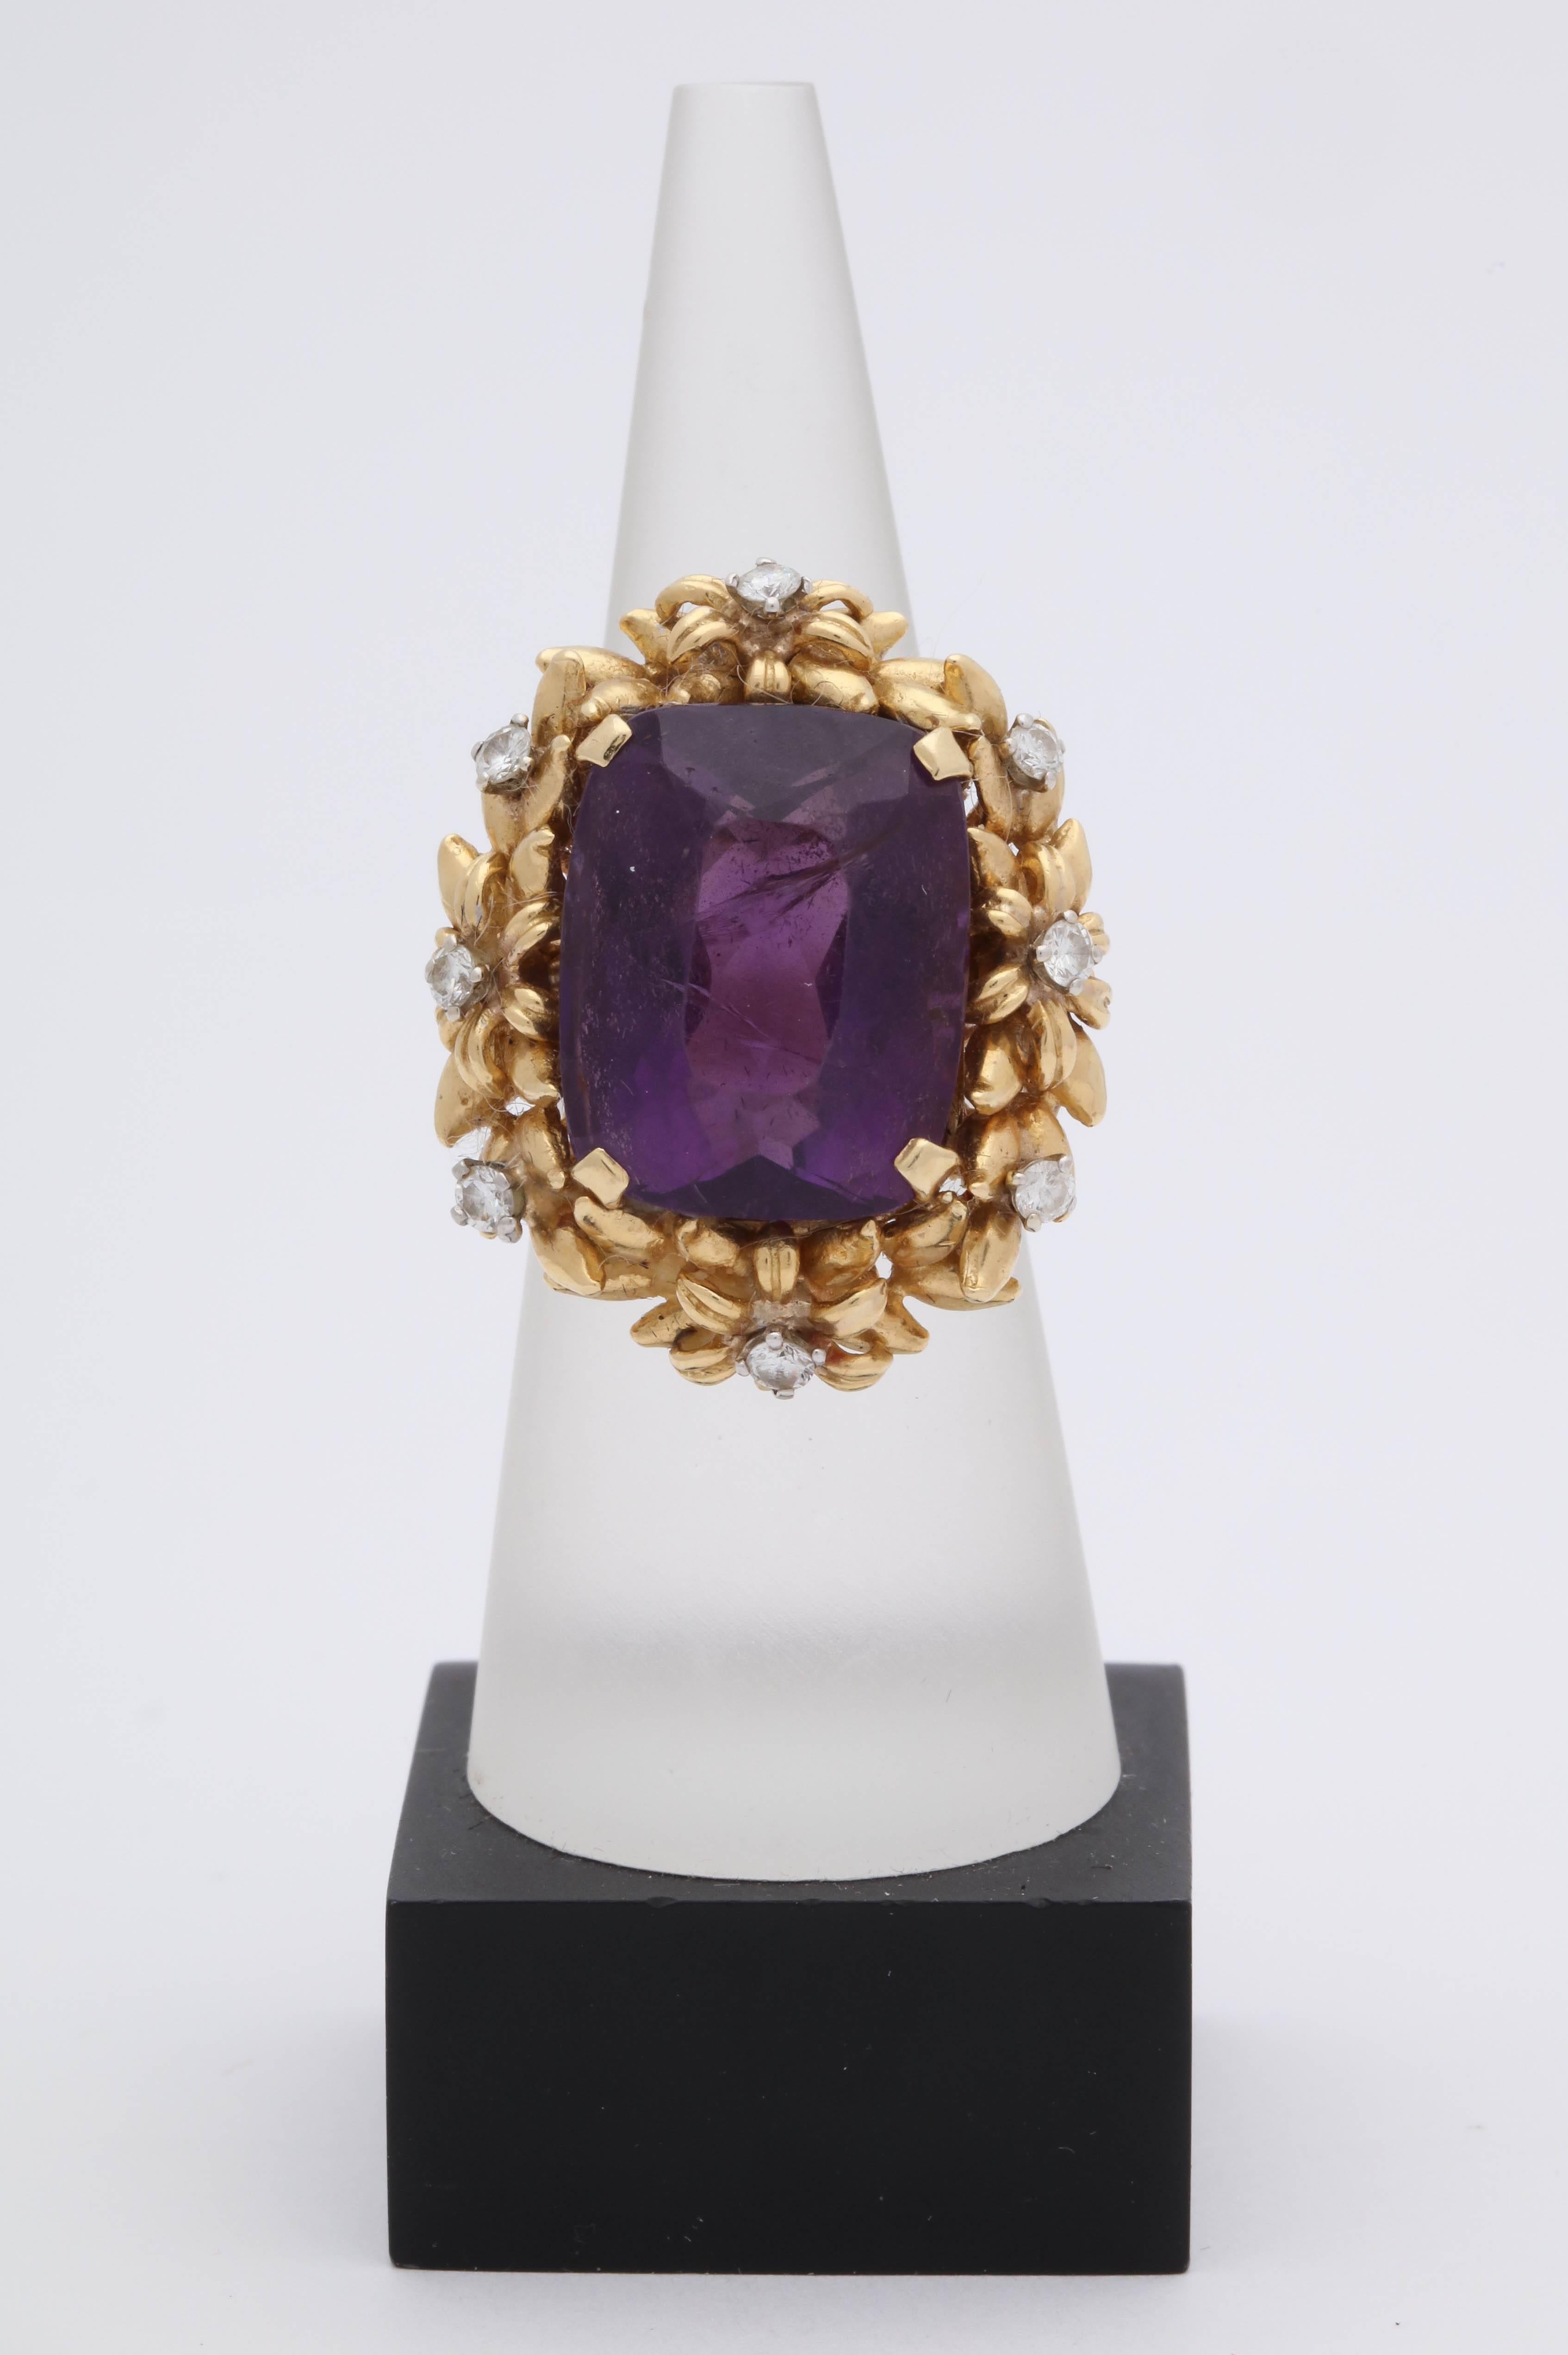 One Ladies 18kt Yellow Gold Cocktail Ring Featuring A 20 Carat Emerald Cut Beautiful Color Amethyst . Further Designed With Eight Full Cut Diamonds Weighing Approximately .70 Cts Total Weight. Ring Has Beautiful Floral Design Craftmanship And